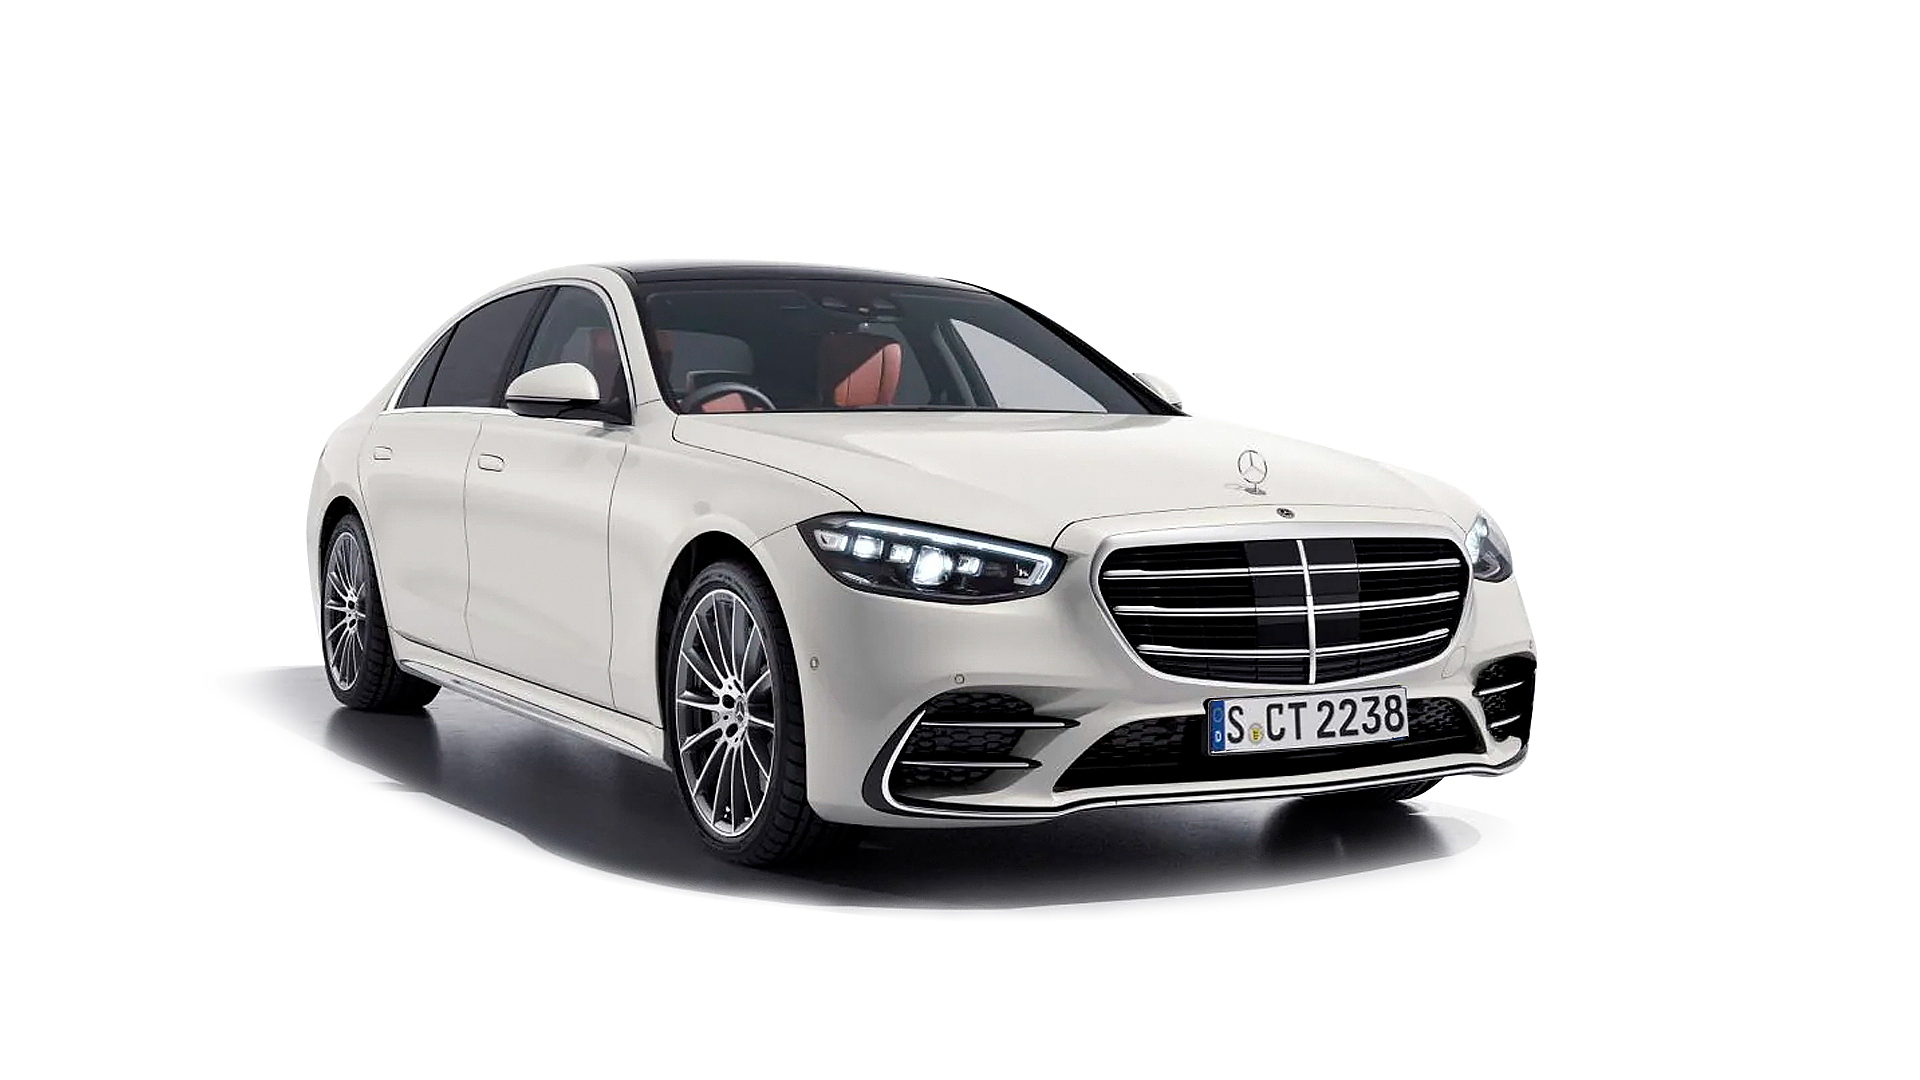 Mercedes C-Class Type W204 Limousine 6,2l C 63 AMG 358kW (487 hp) Wheels  and Tyre Packages